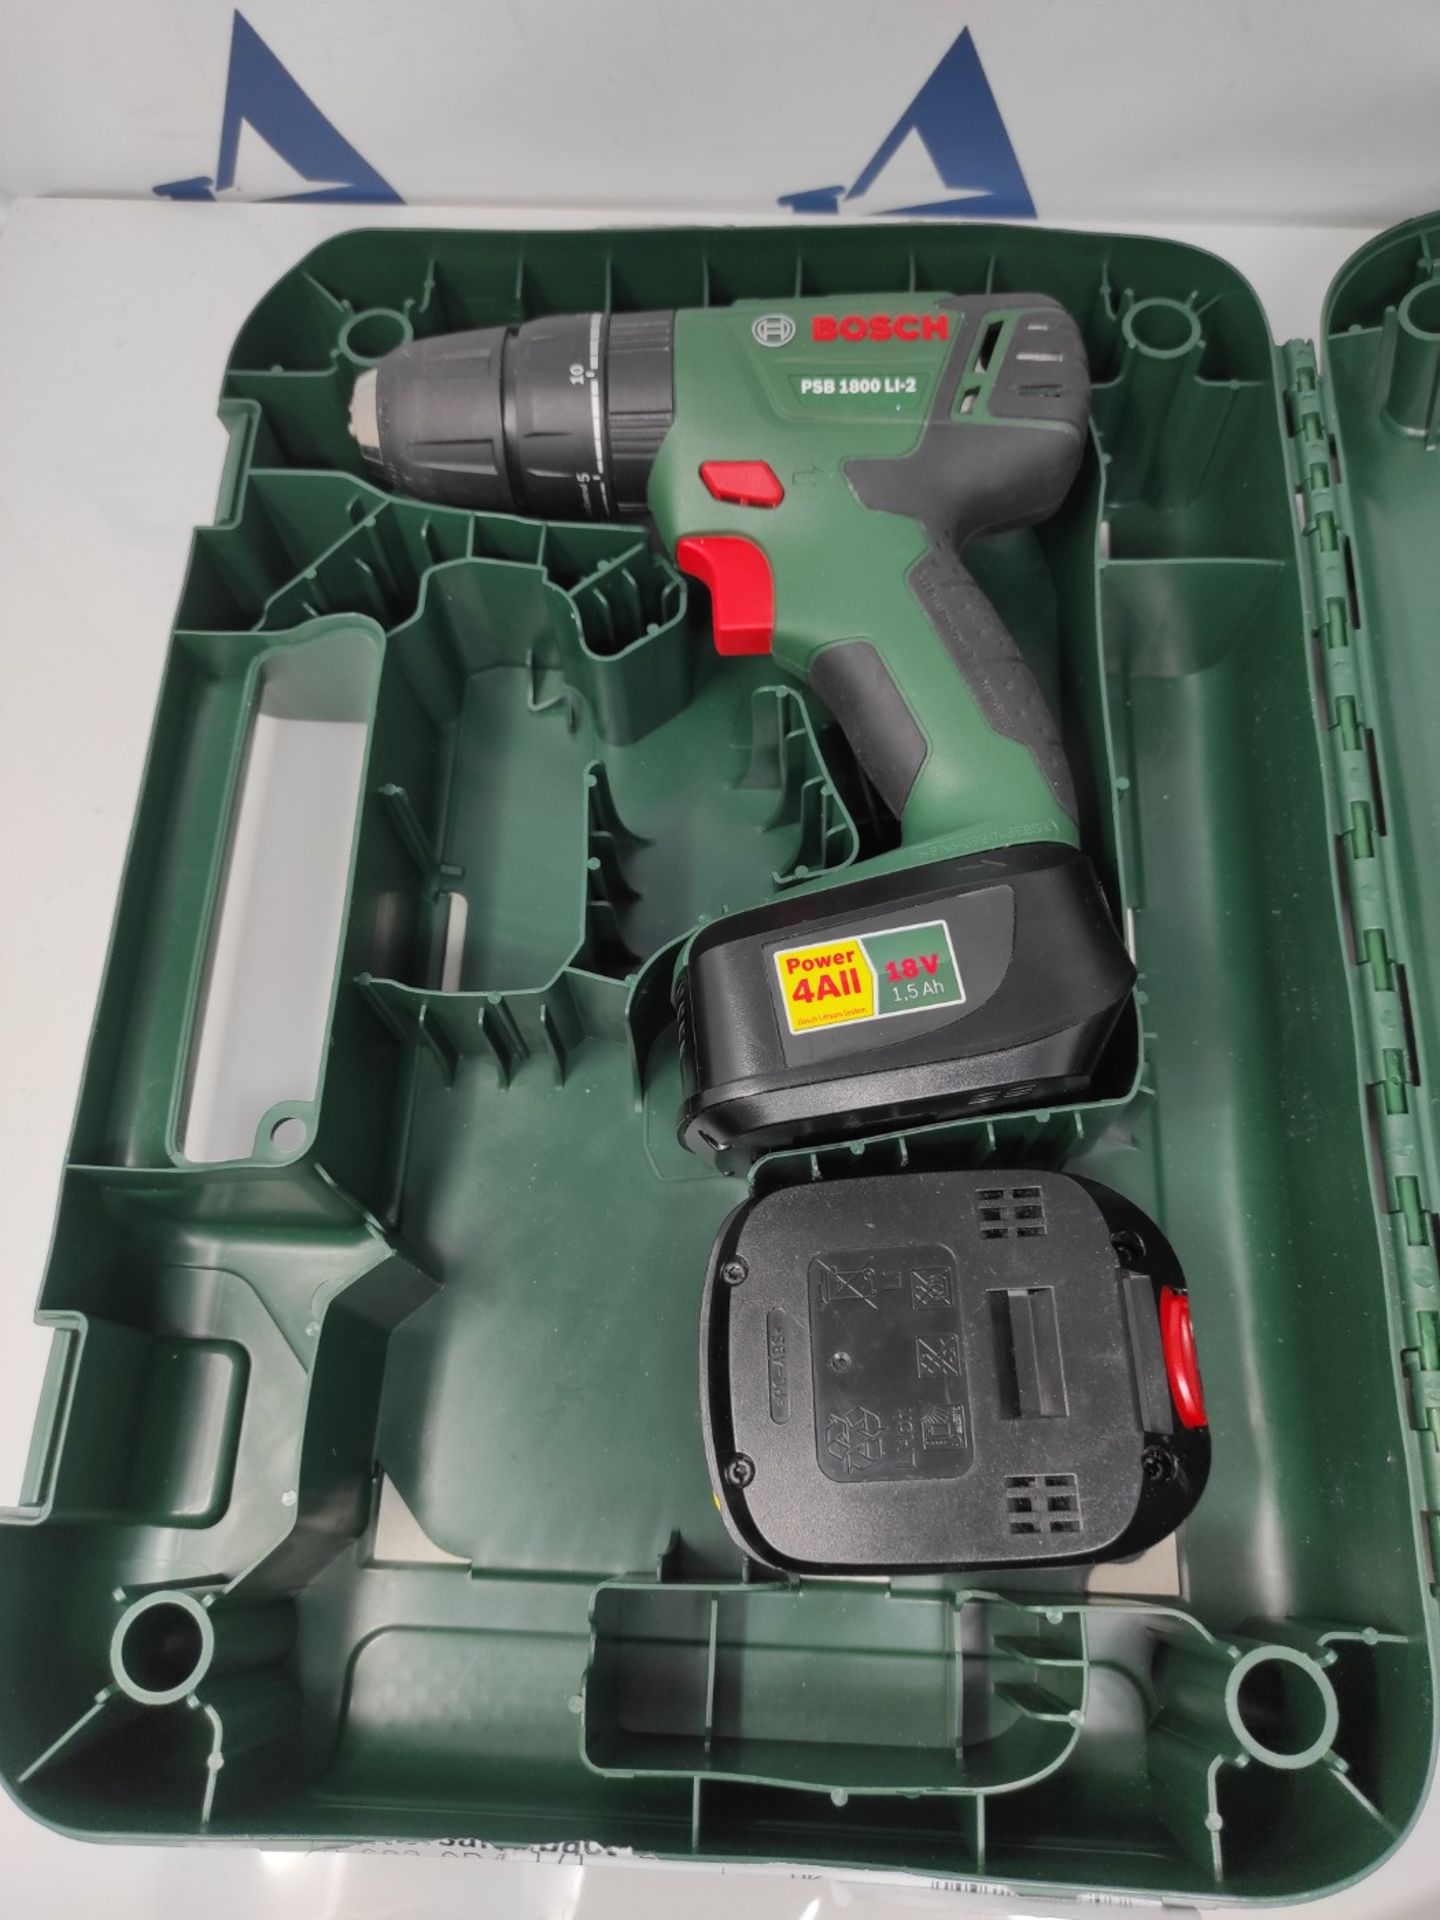 RRP £80.00 Bosch Home and Garden Cordless Combi Drill UniversalImpact 18V, 20 torque settings, ma - Image 3 of 3